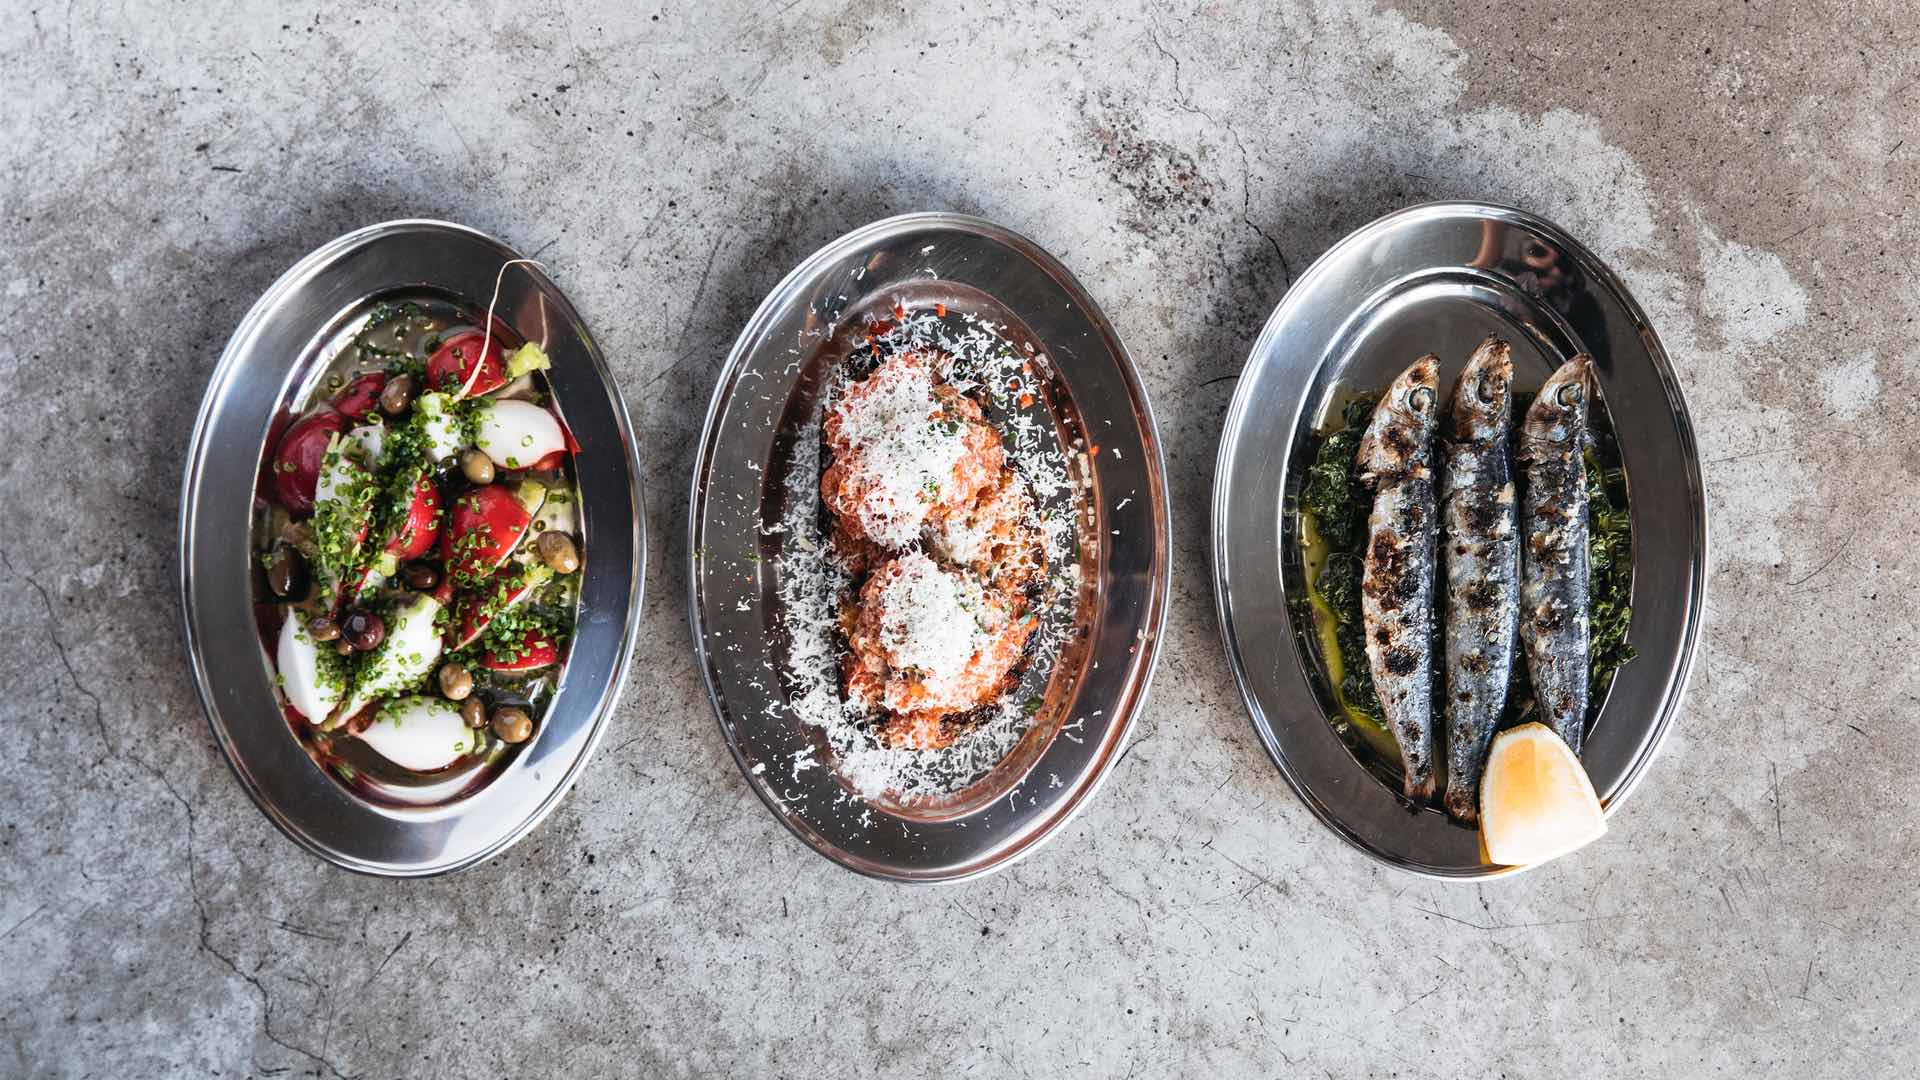 Bonnie's Food + Wine Is Maurice Terzini's New Bondi Bar Serving Fried Pizza and Natural Wine